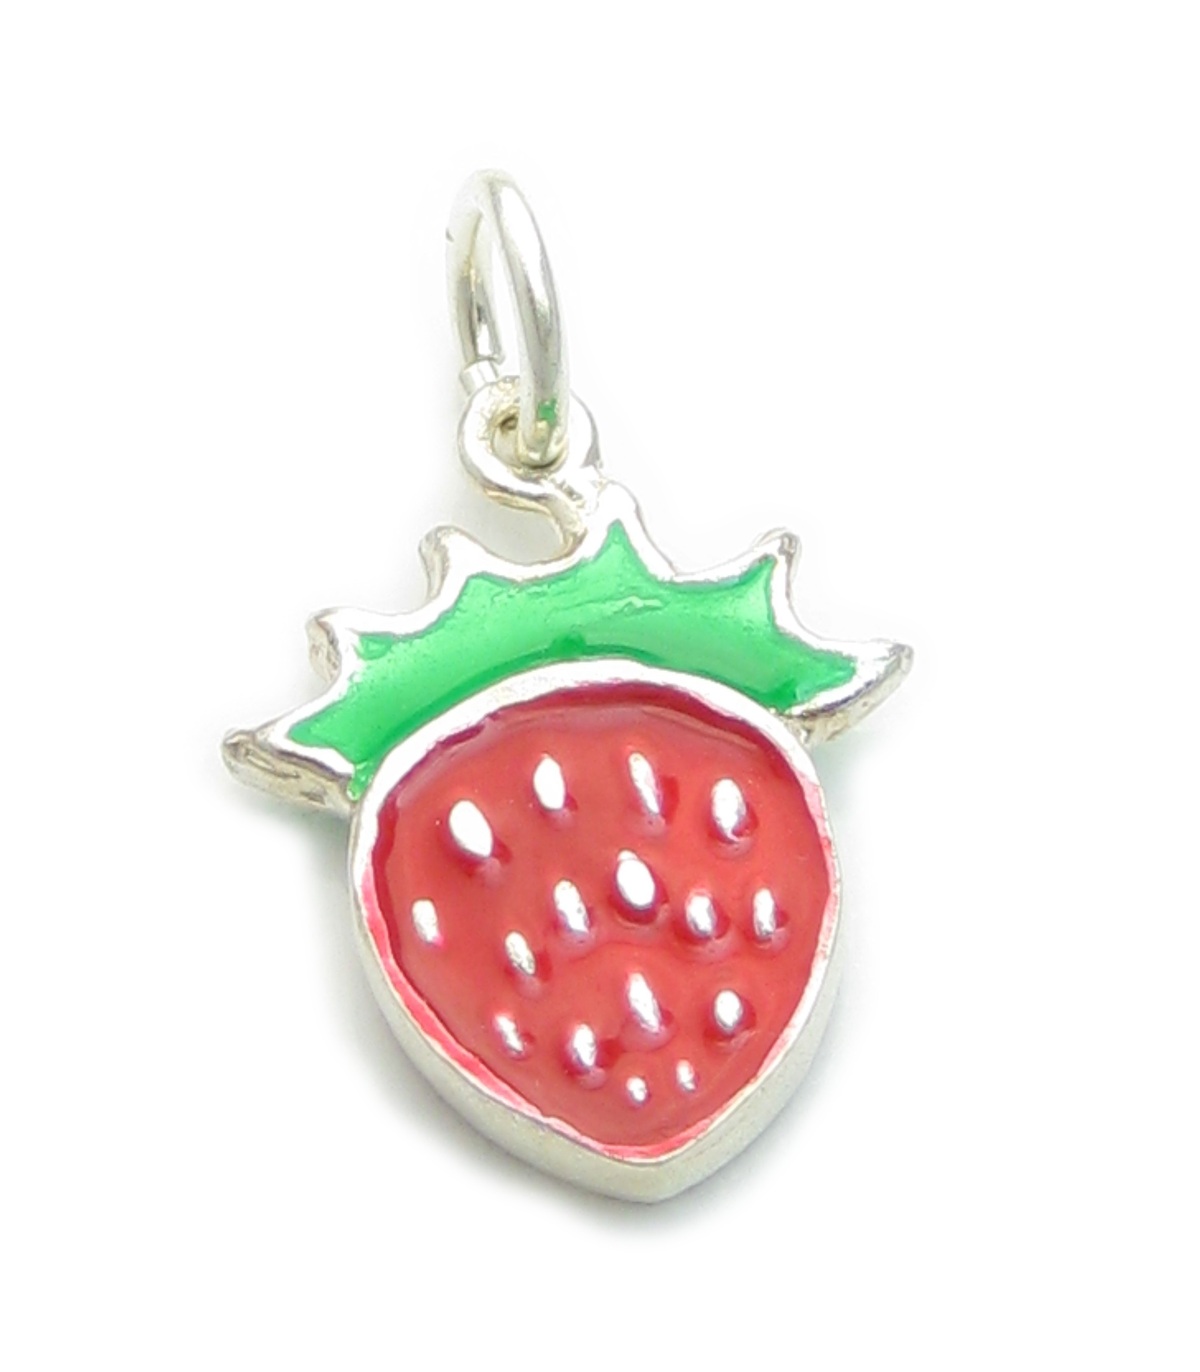 fruit charms